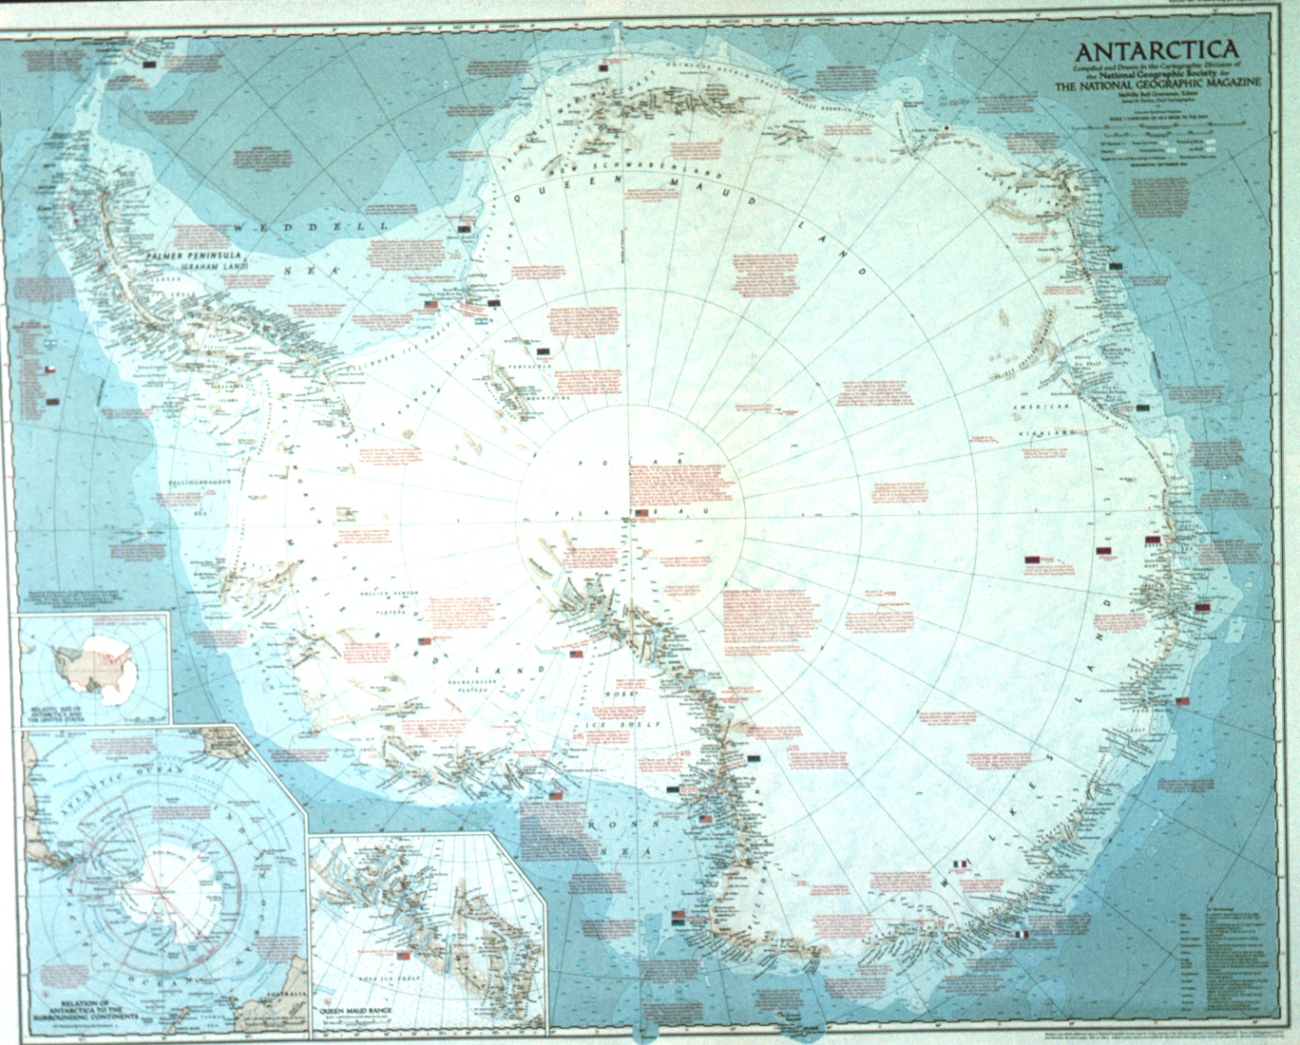 National Geographic Antarctica Map